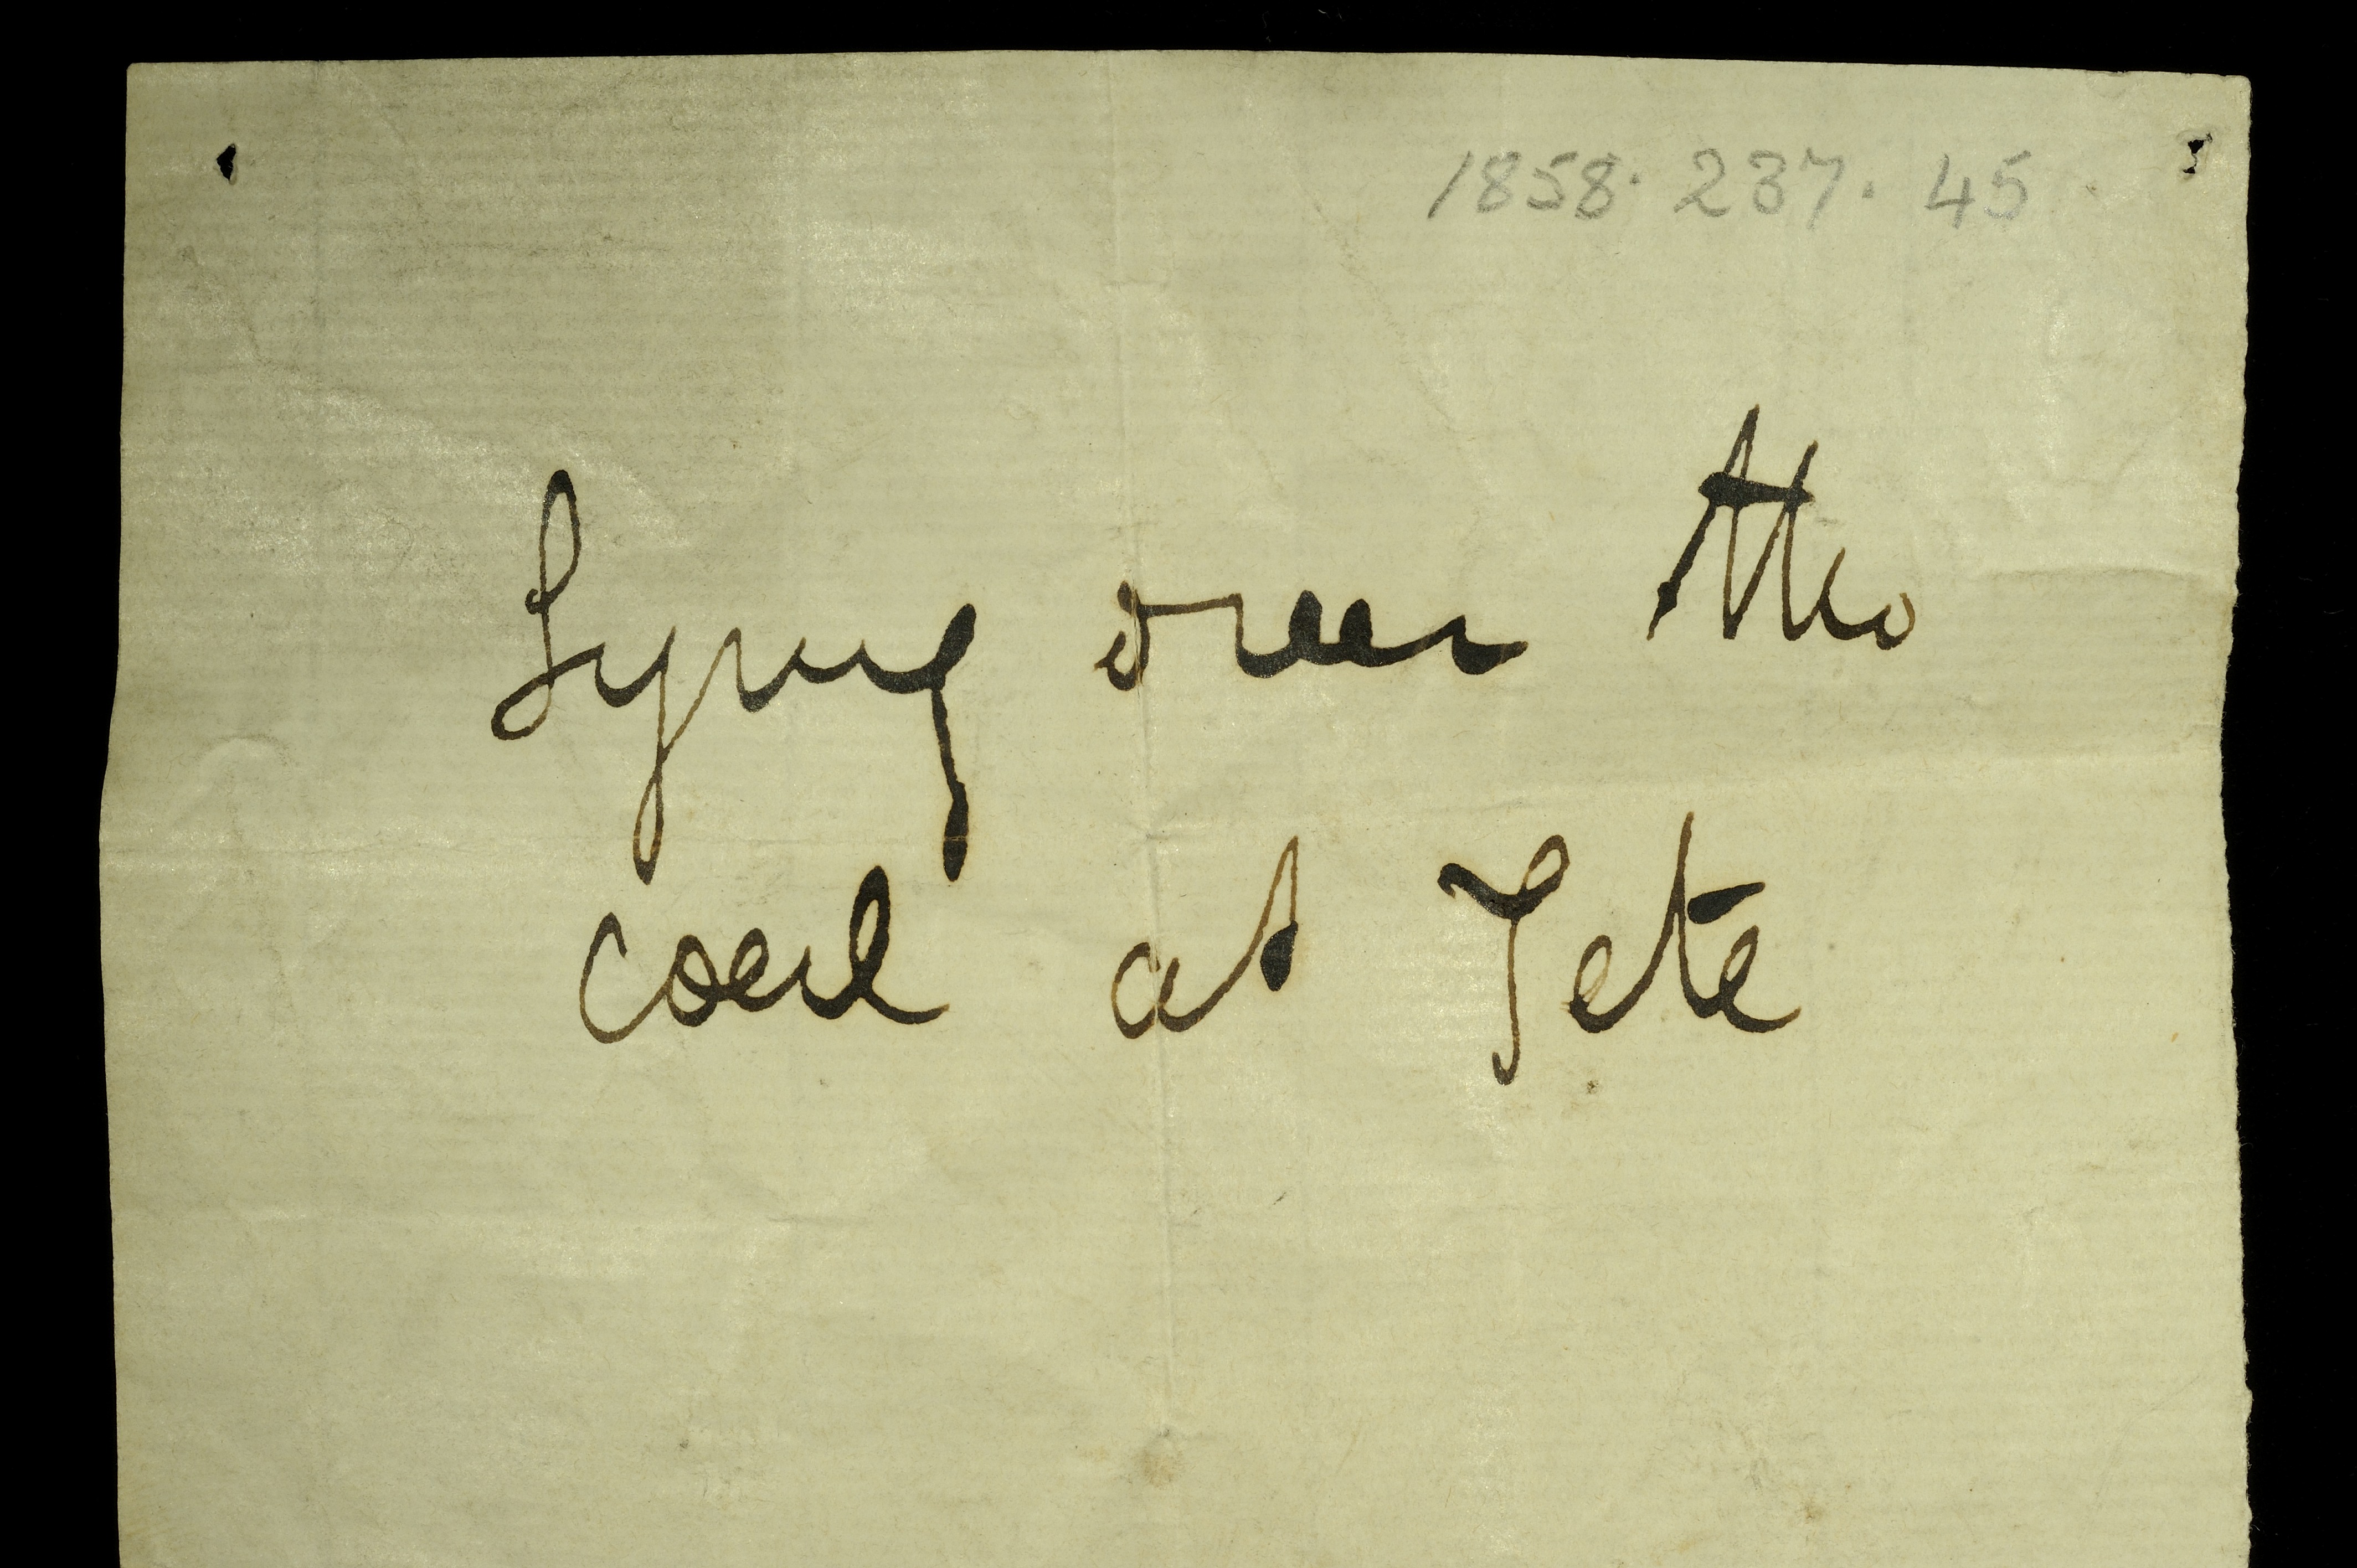 Livingstone’s note written in the field for the micaceous grit: ‘Lying over the coal at Tete.’